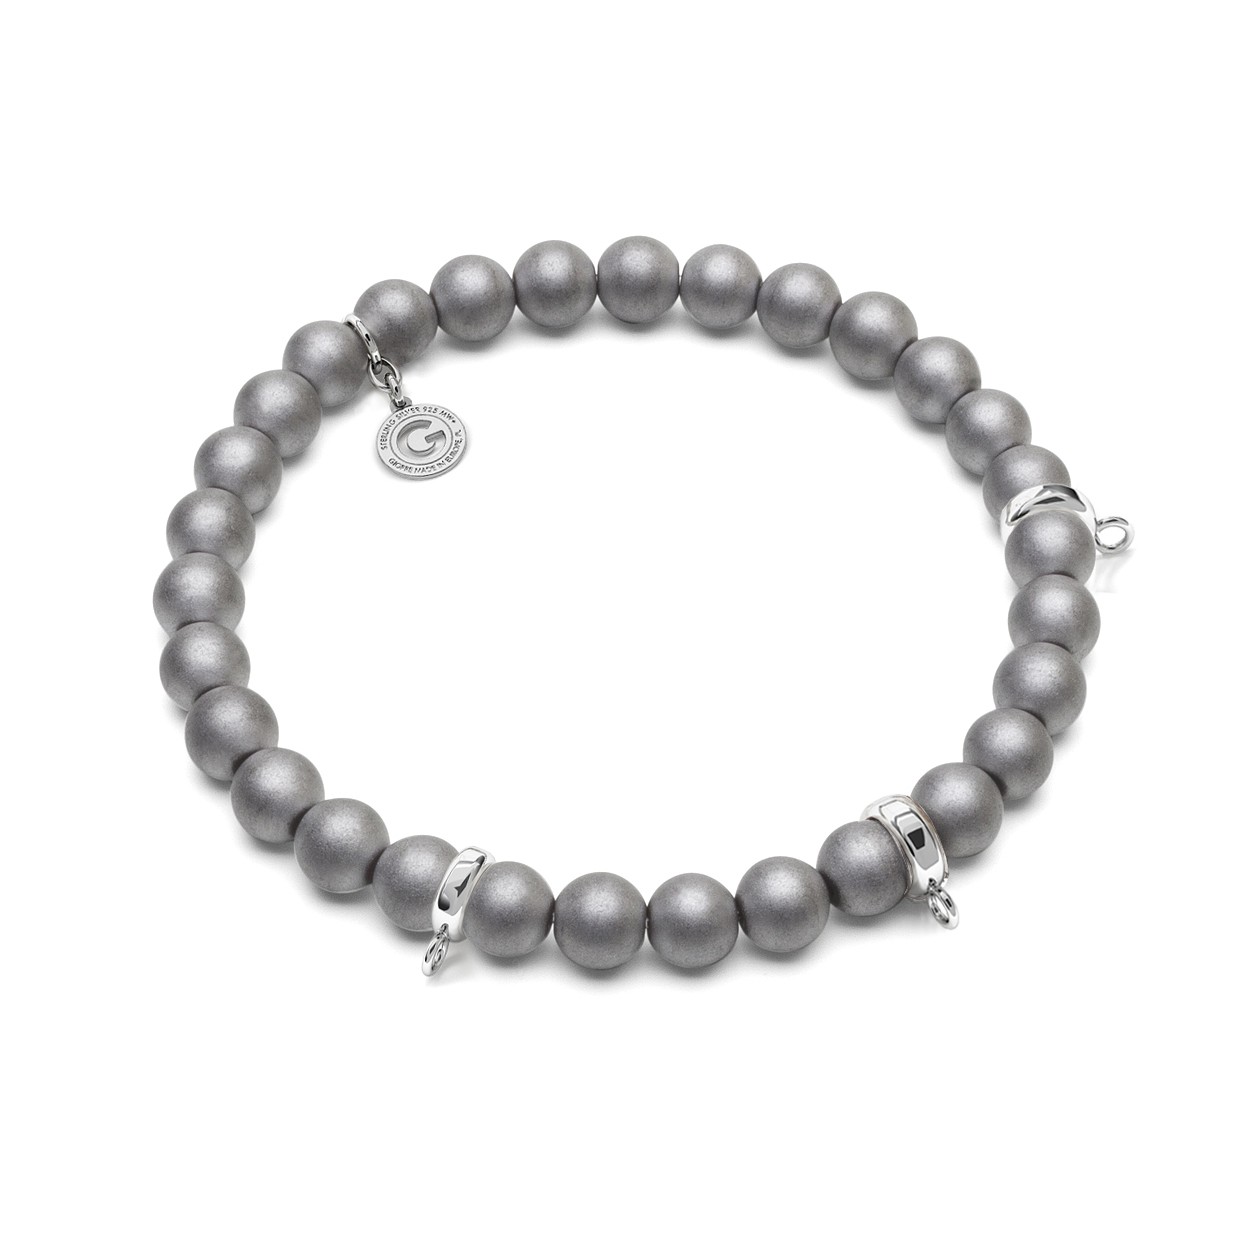 MATTE HEMATITE, FLEXIBLE BRACELET FOR 3 CHARMS, WITH NATURAL STONES